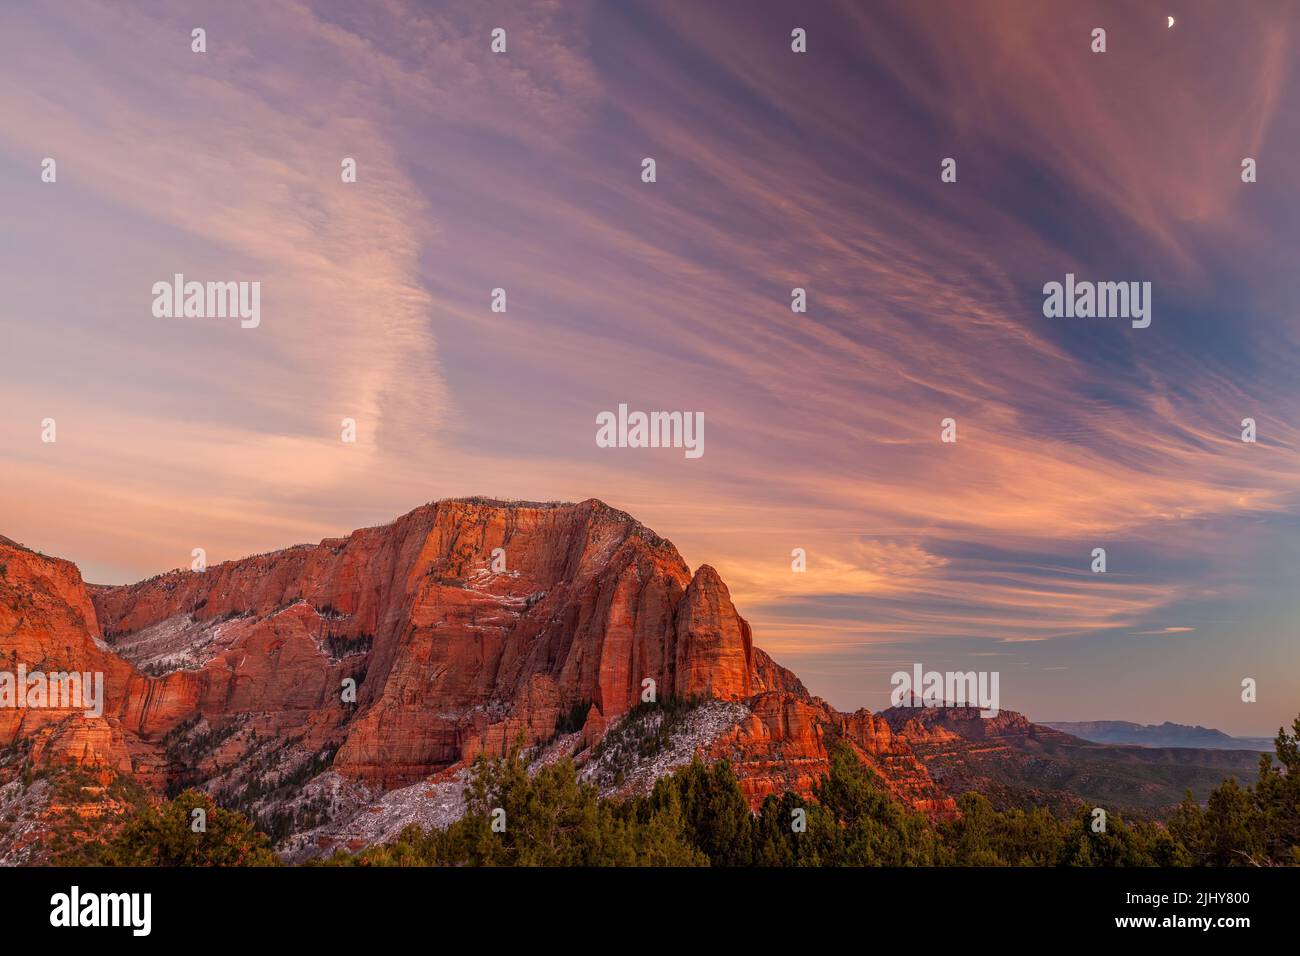 Sunset over Shuntavi Butte in the Kolob section of Zion National Park, Utah Stock Photo